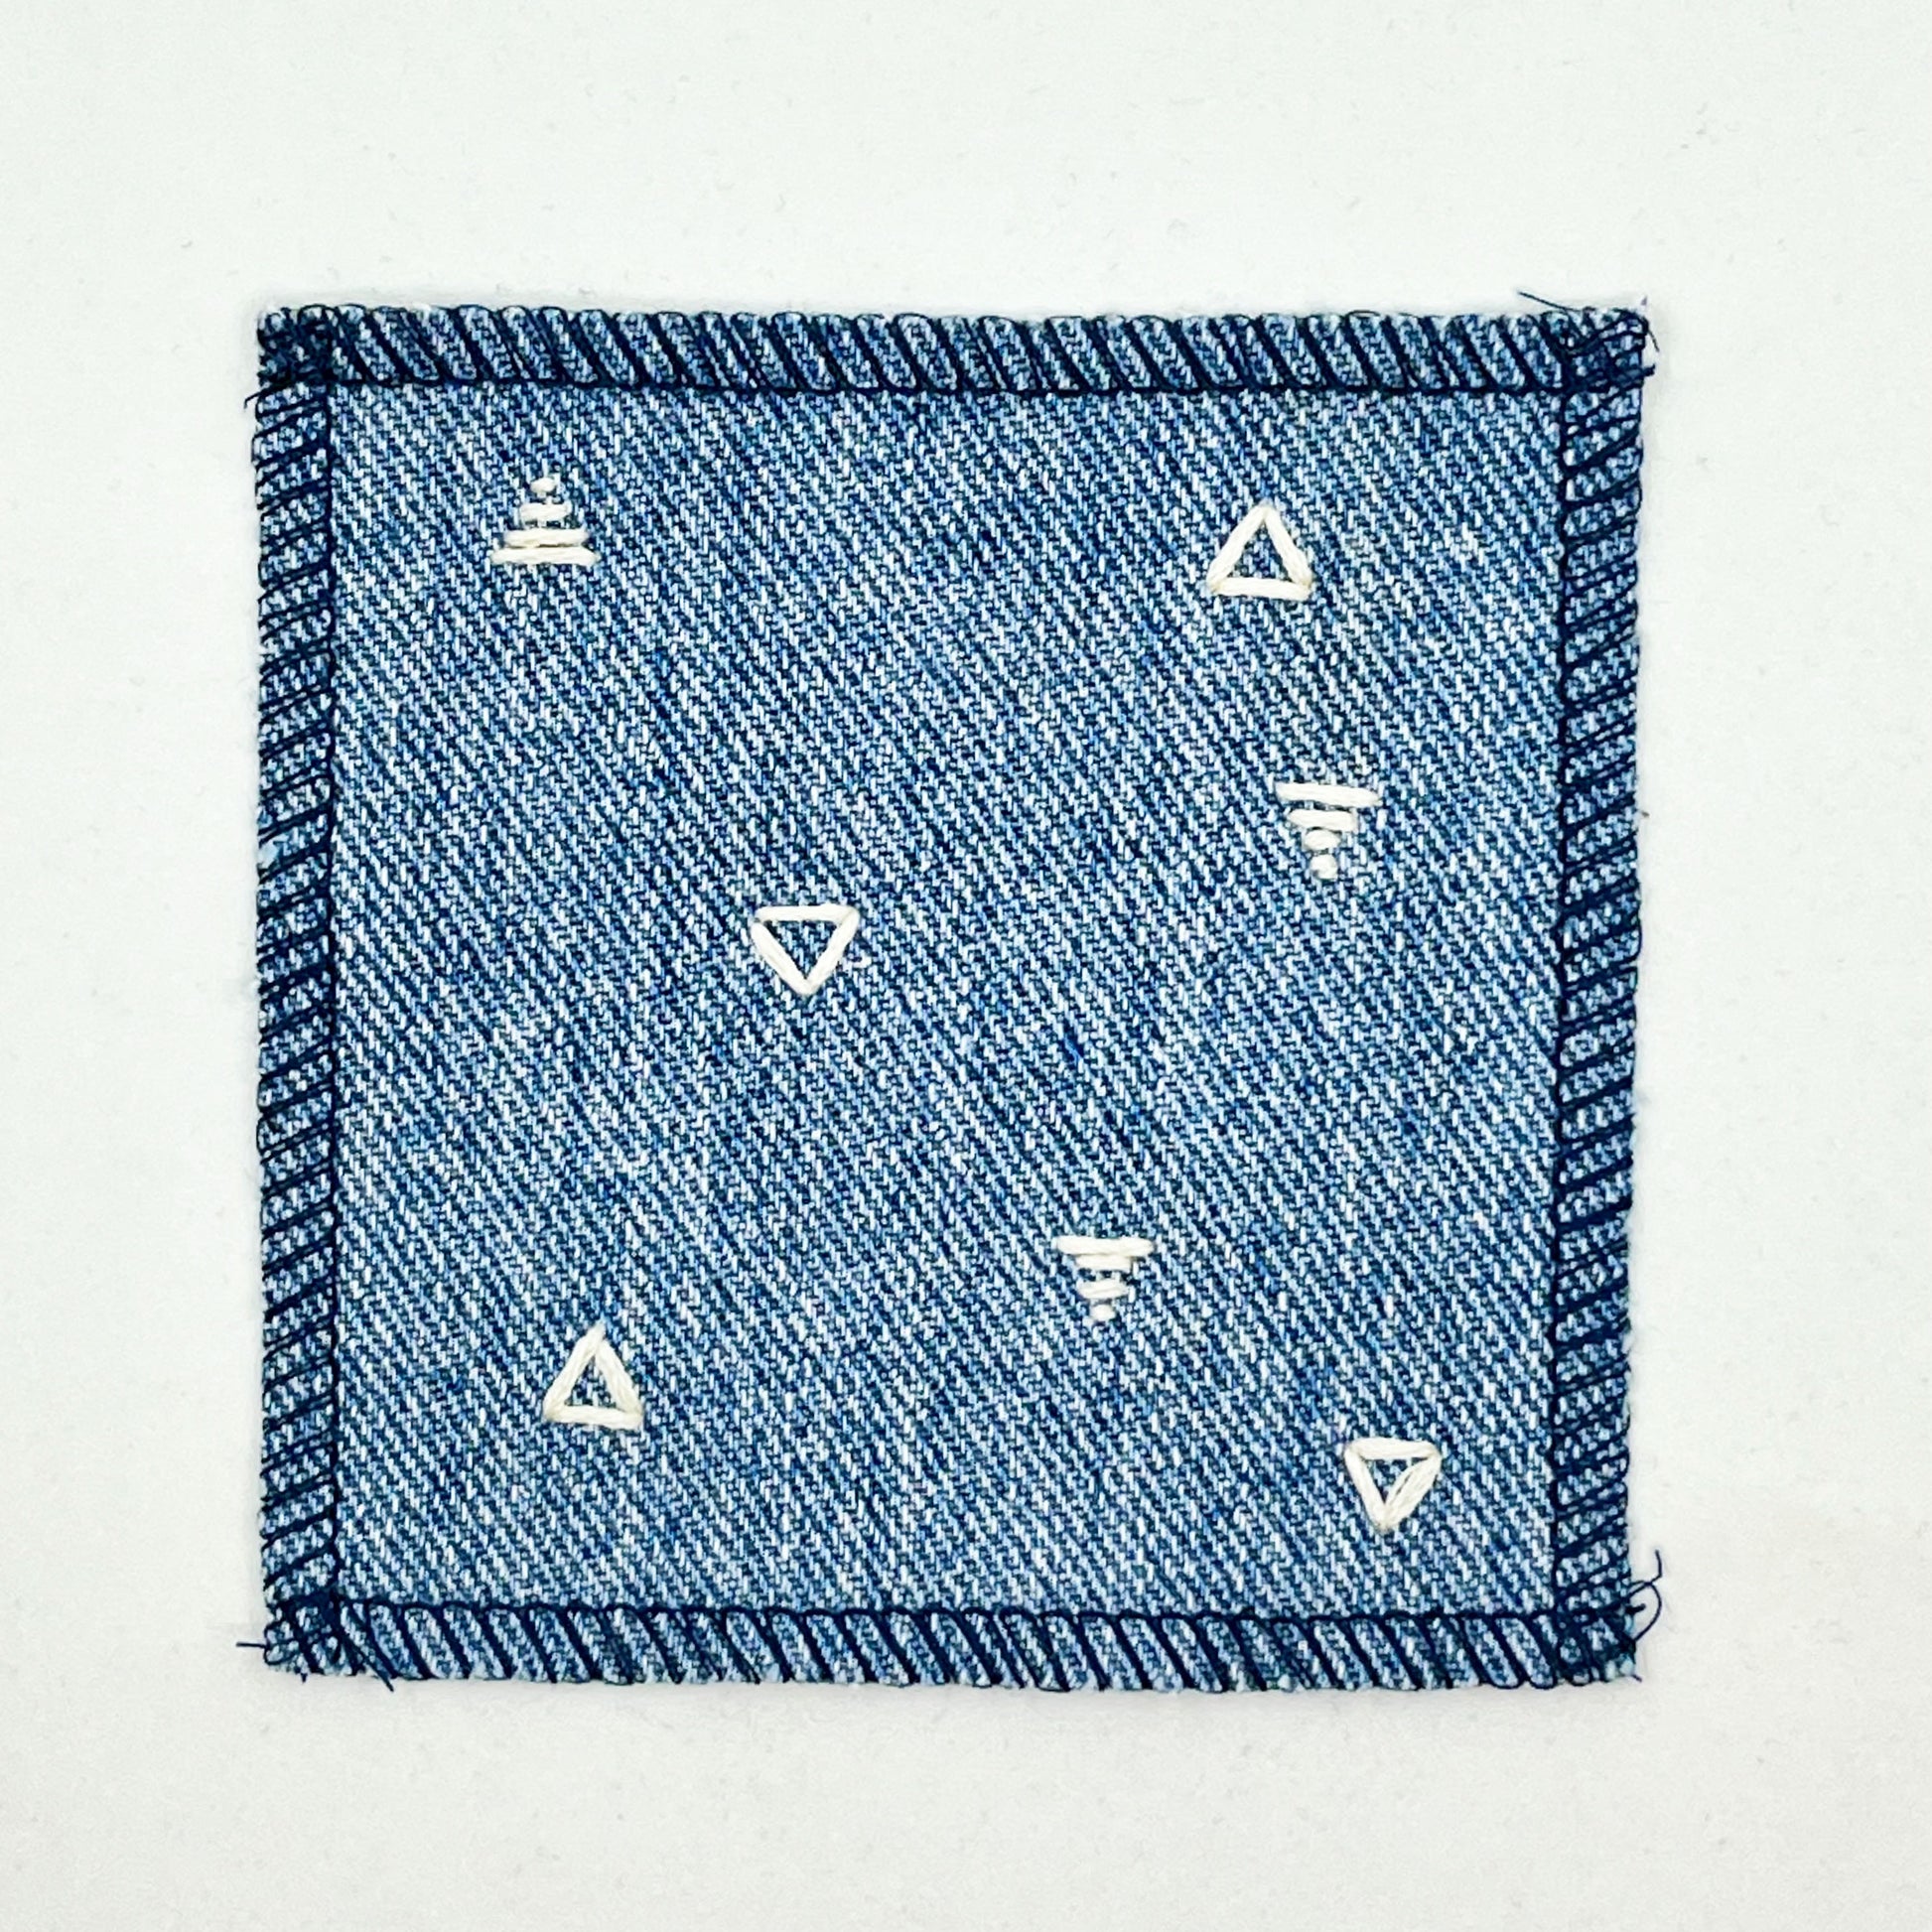 a square patch made out of denim, handstitched with scattered ivory triangles, some as outlines some with a line fill, with overlocked edges, on a white background